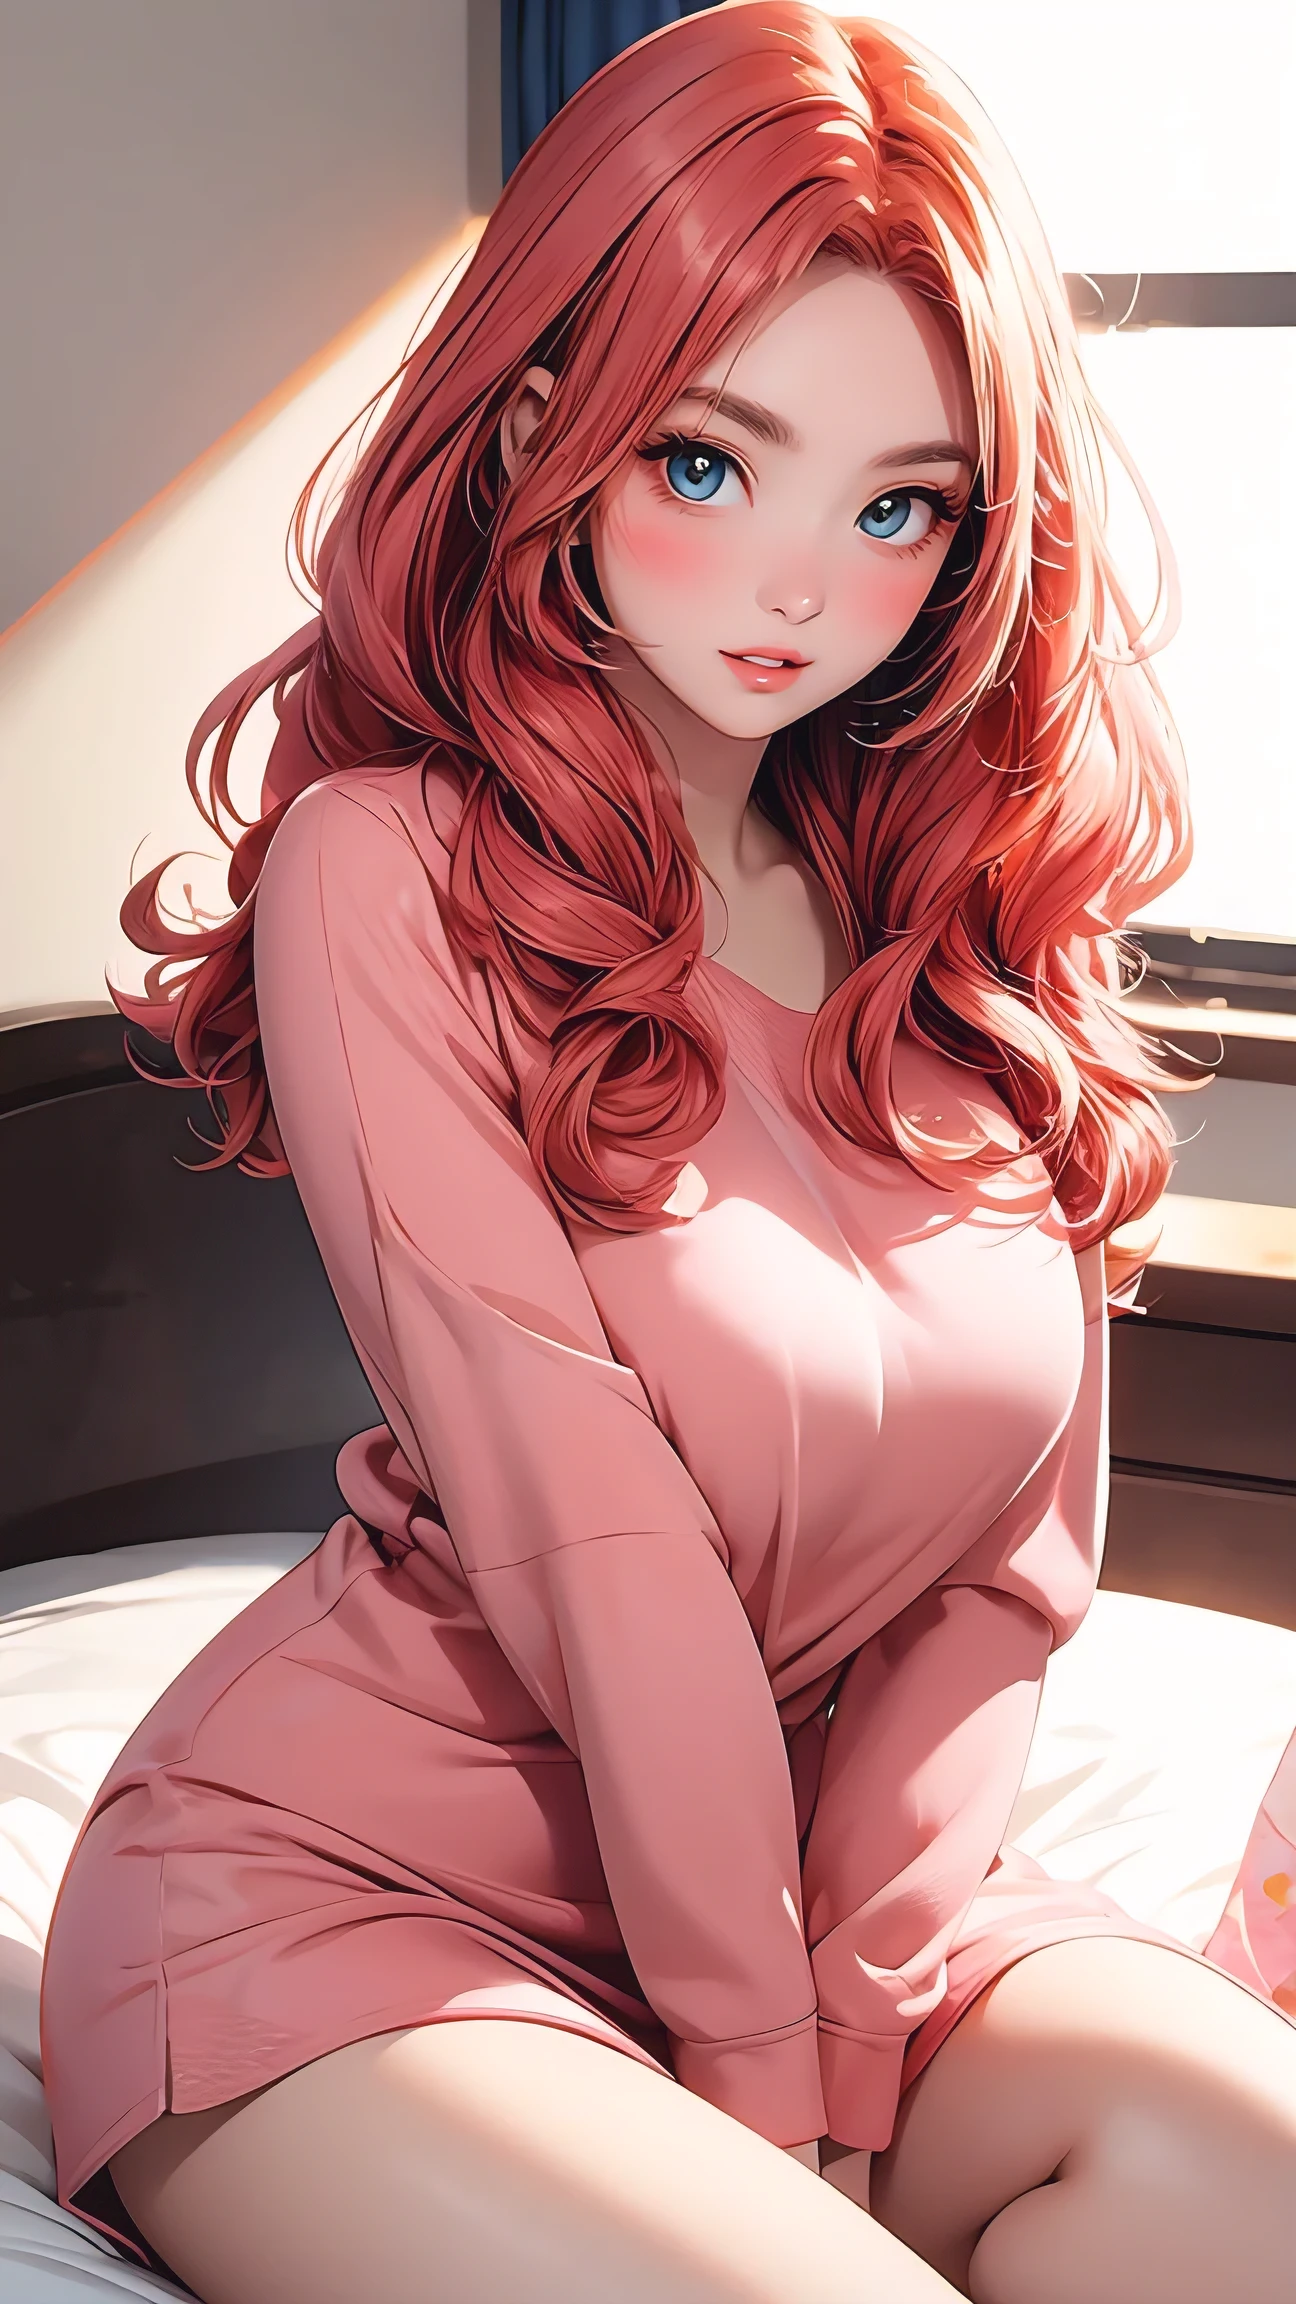 masterpiece, best quality, solo, woman, perfect slim fit body, thick thighs, large breasts, sitting pose, on bed, pink floral pajamas, wavy red hair, attractive feature, elaborate details, chic, ambient light